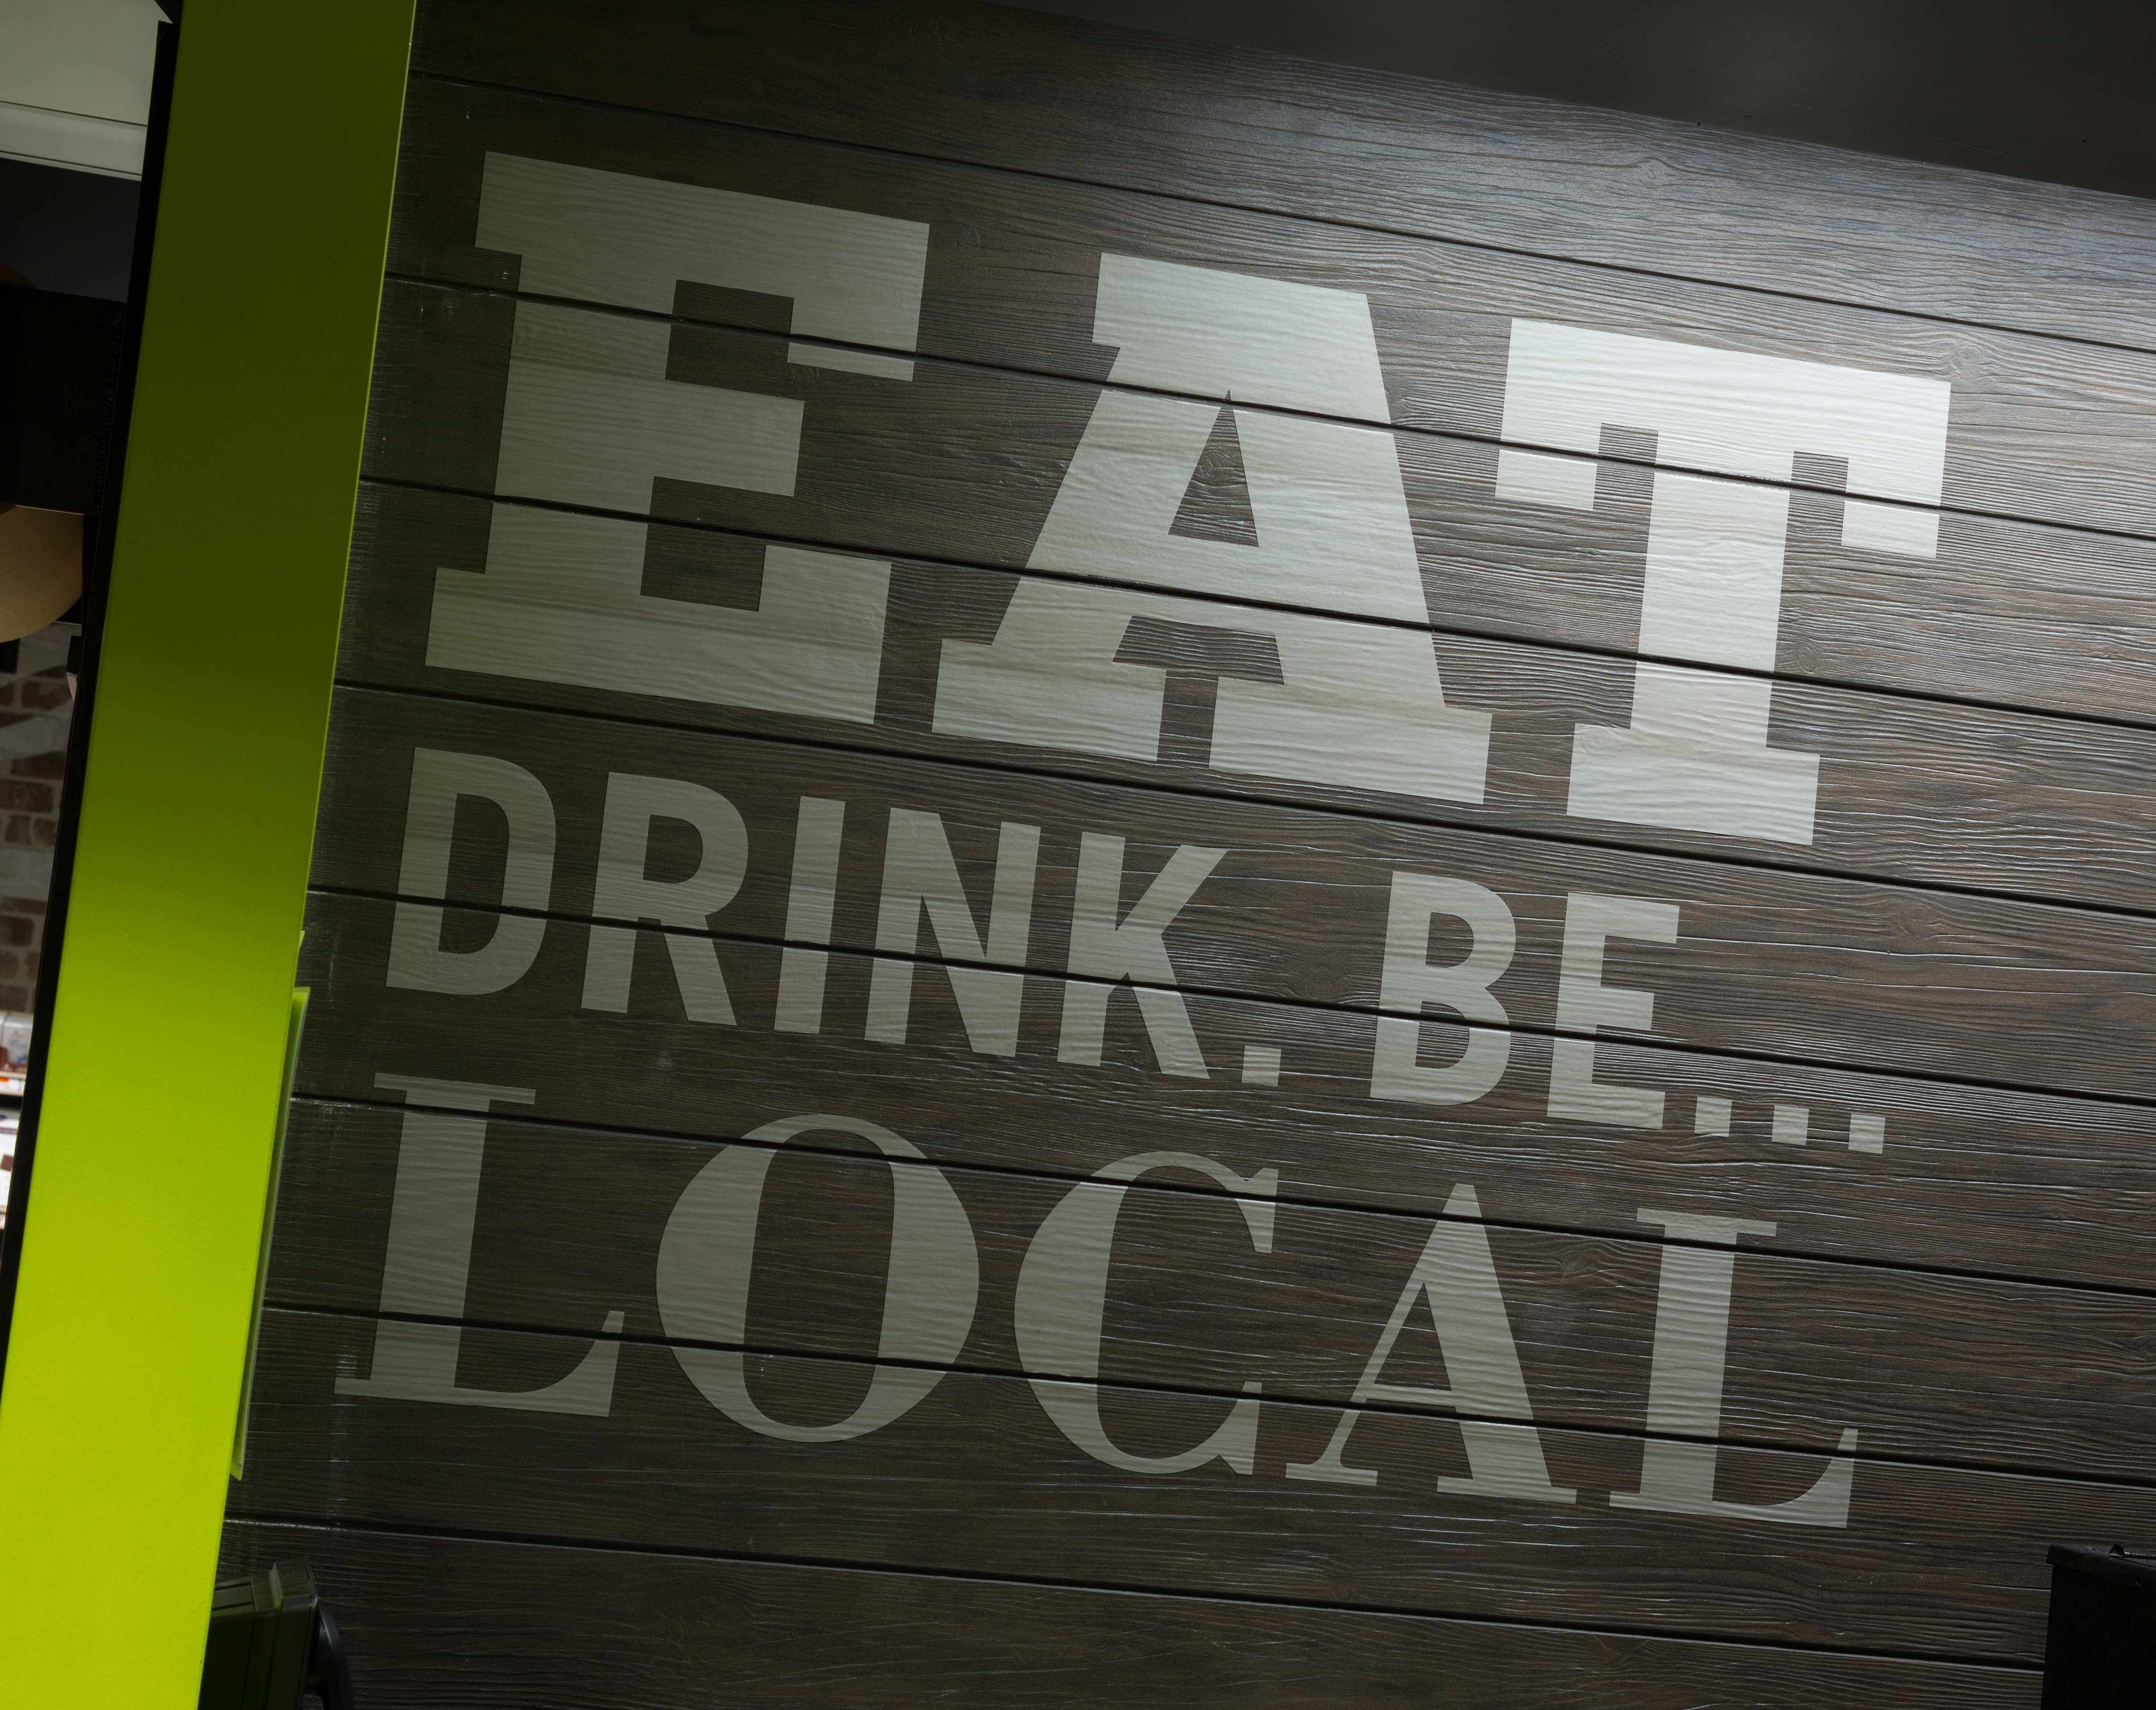 "Eat Drink. Be... Local" experiential graphics on a wood panel wall in Brothers Marketplace Medfield, MA